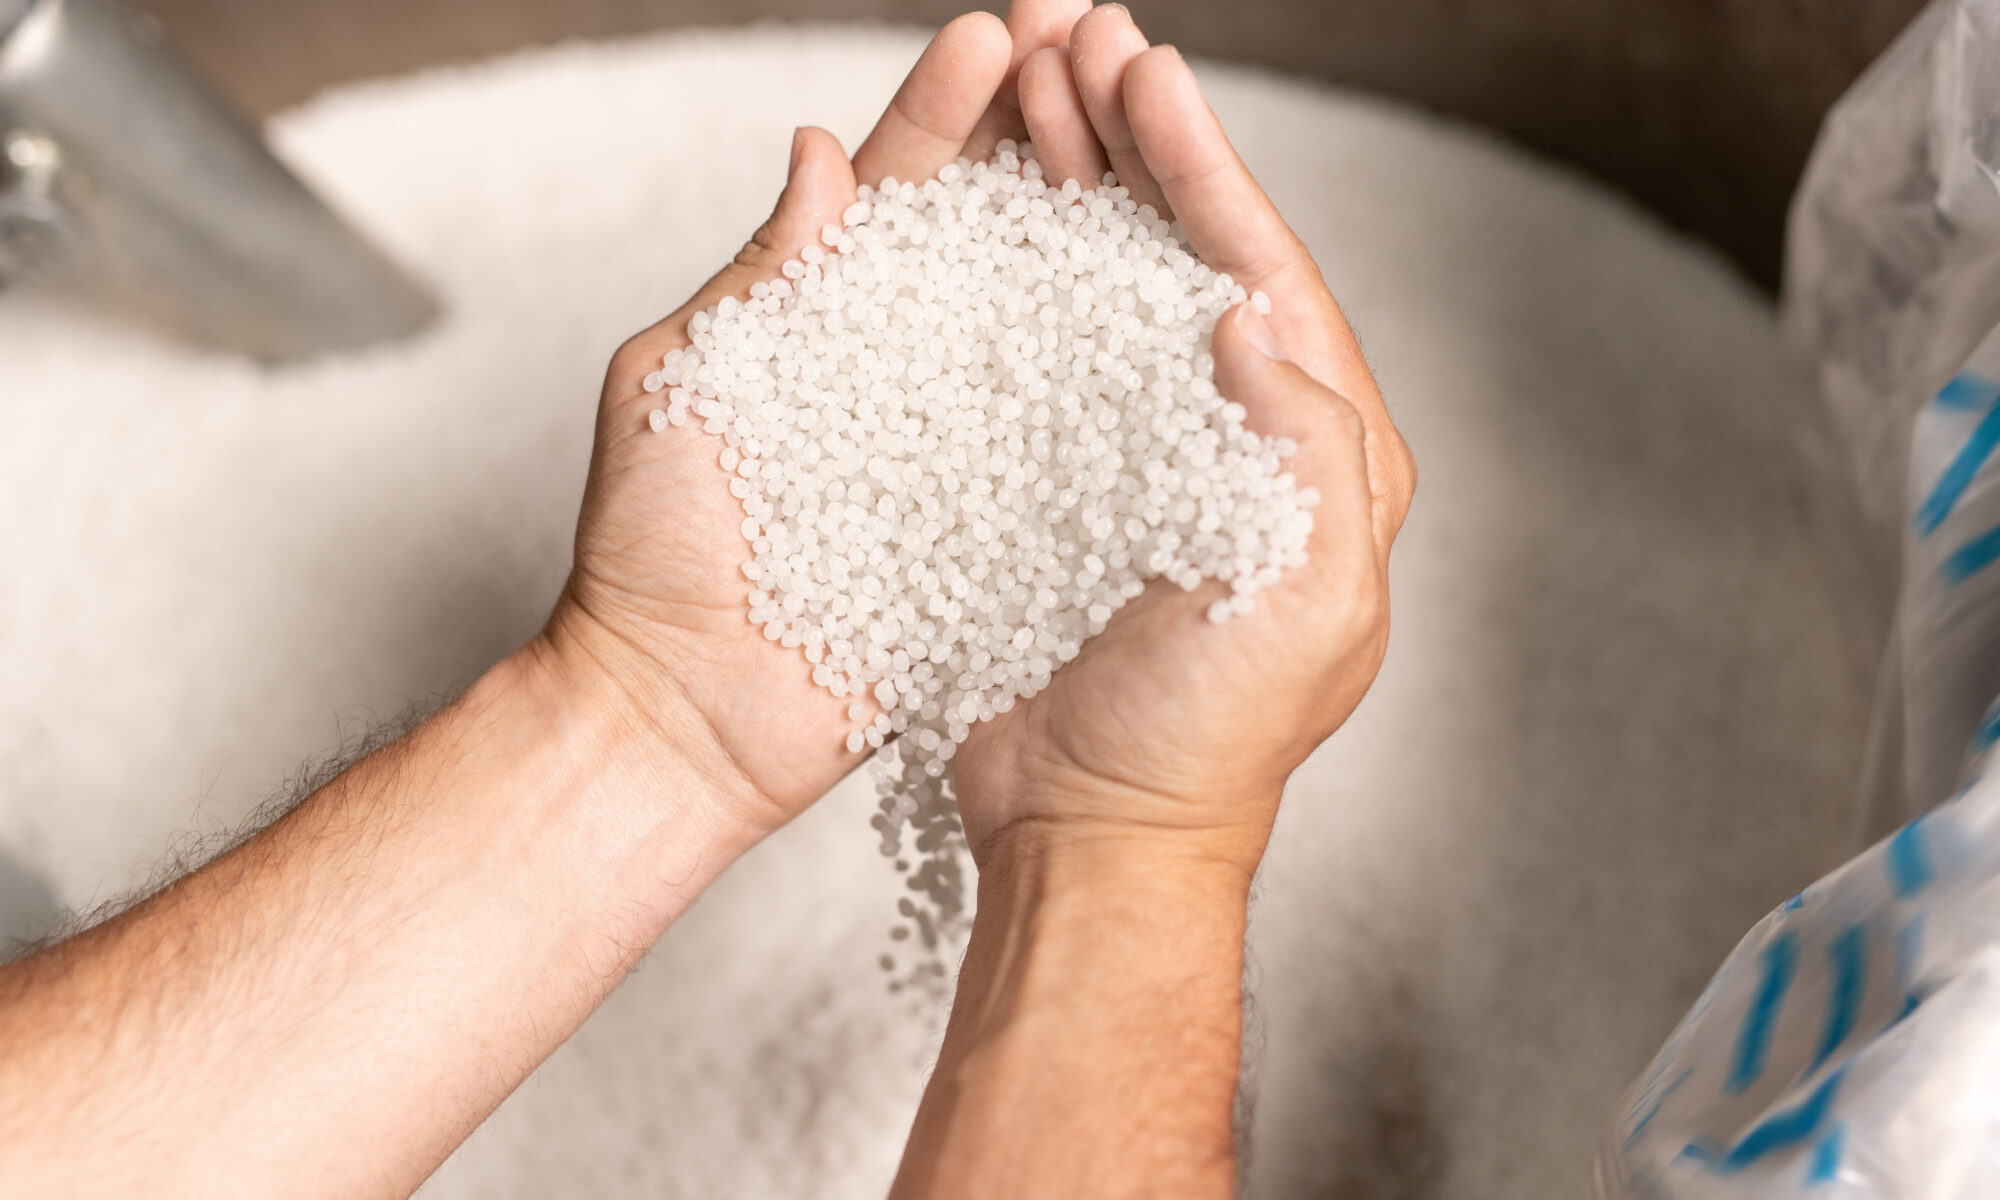 factory worker hands holding pile of white polymer pellets during working process